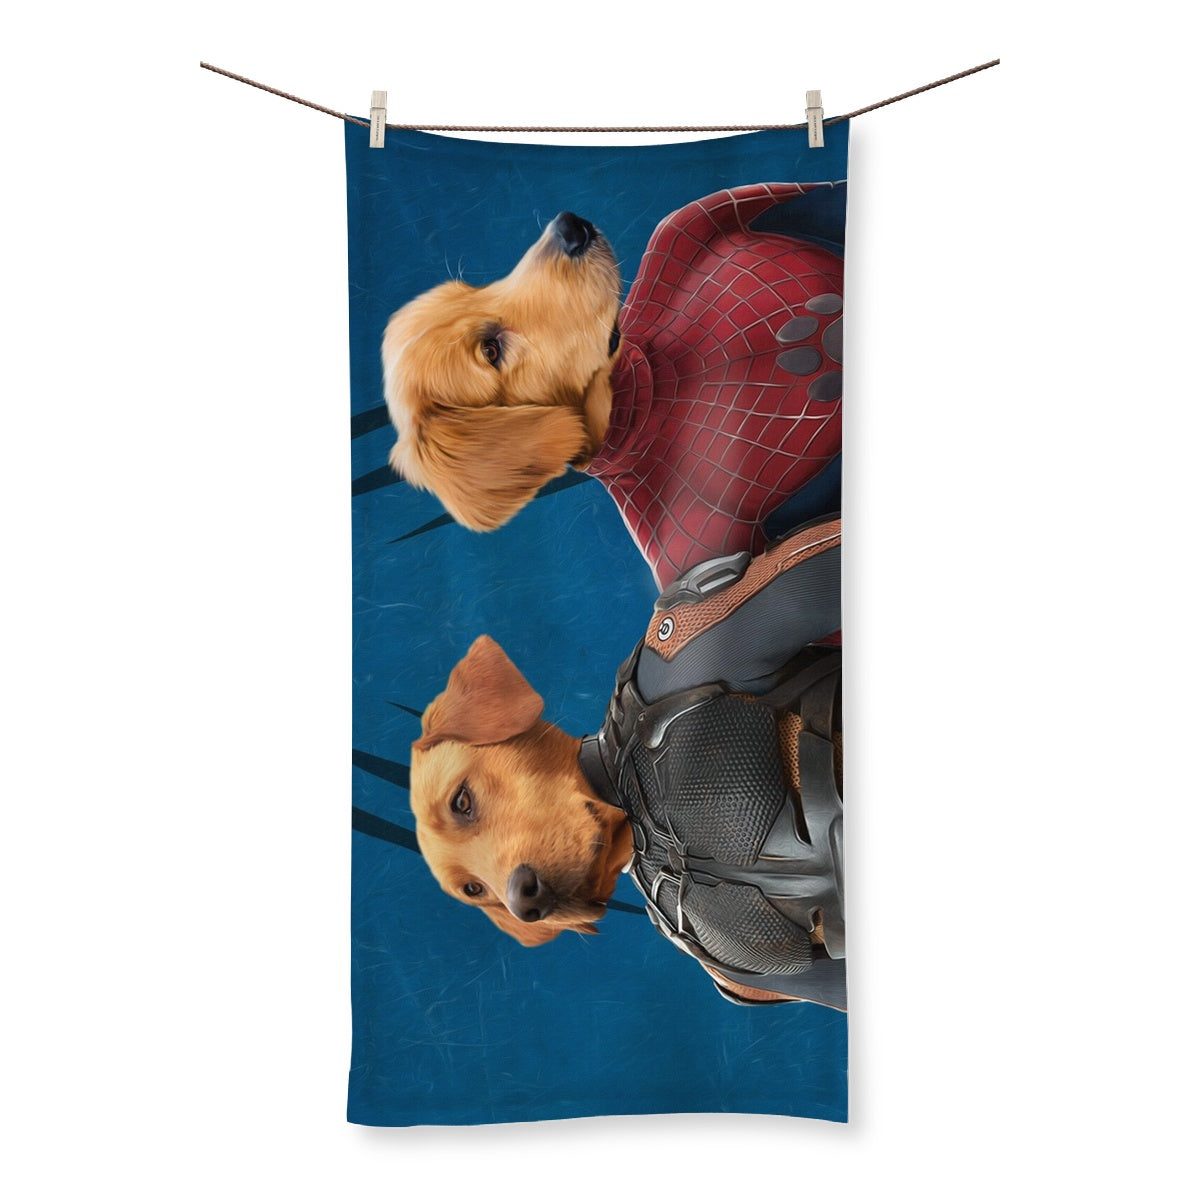 Wolverine & Spider Paw, Paw & Glory, pawandglory, personalized dog blanket, dog picture blanket, pet on a blanket, personalised dog head blanket, personalised dog blanket, custom cat blanket, Pet Portraits blanket,